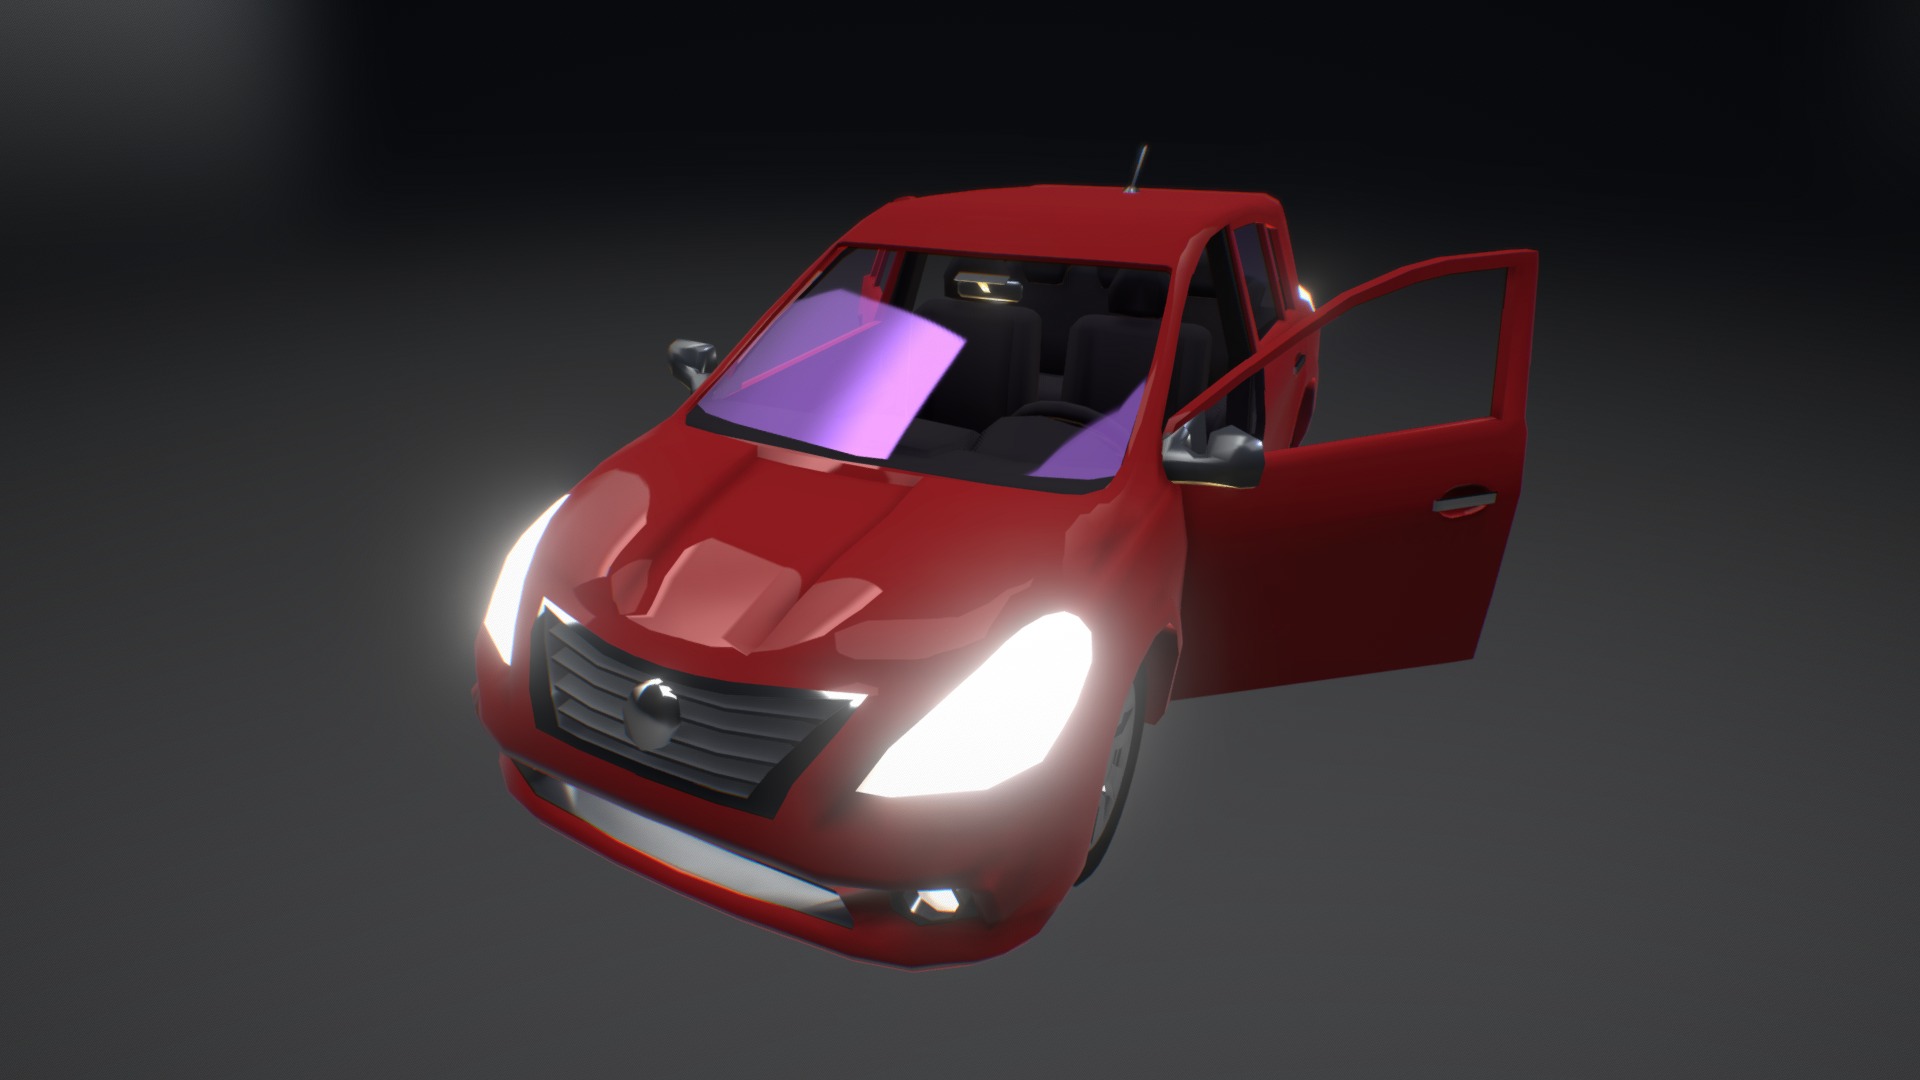 3D model Nissan Versa - This is a 3D model of the Nissan Versa. The 3D model is about a red sports car.